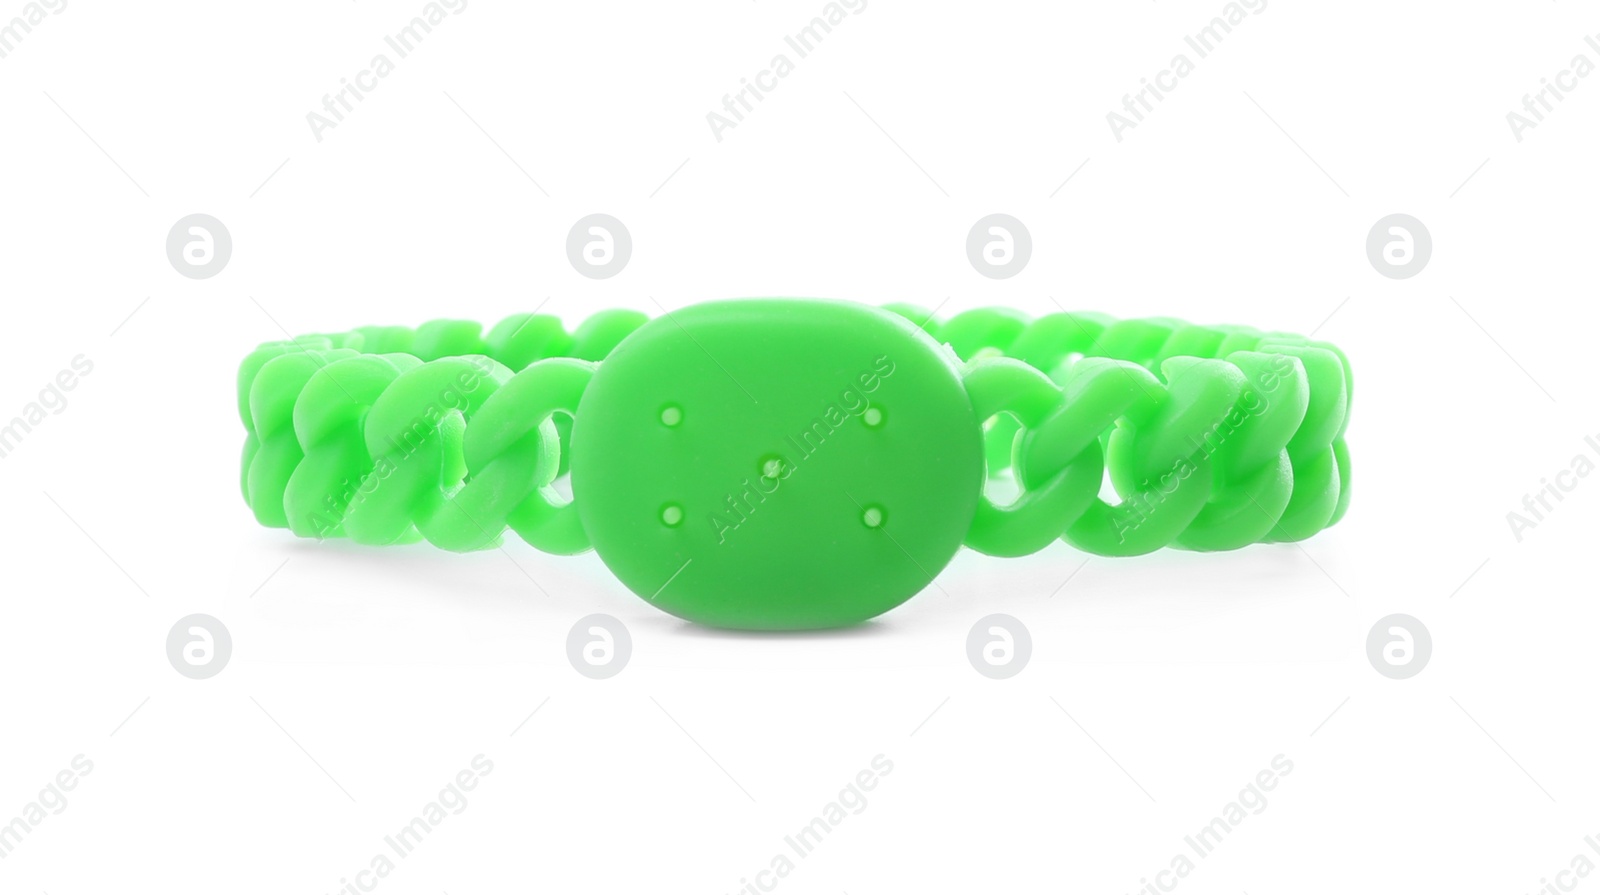 Photo of Insect repellent wrist band isolated on white